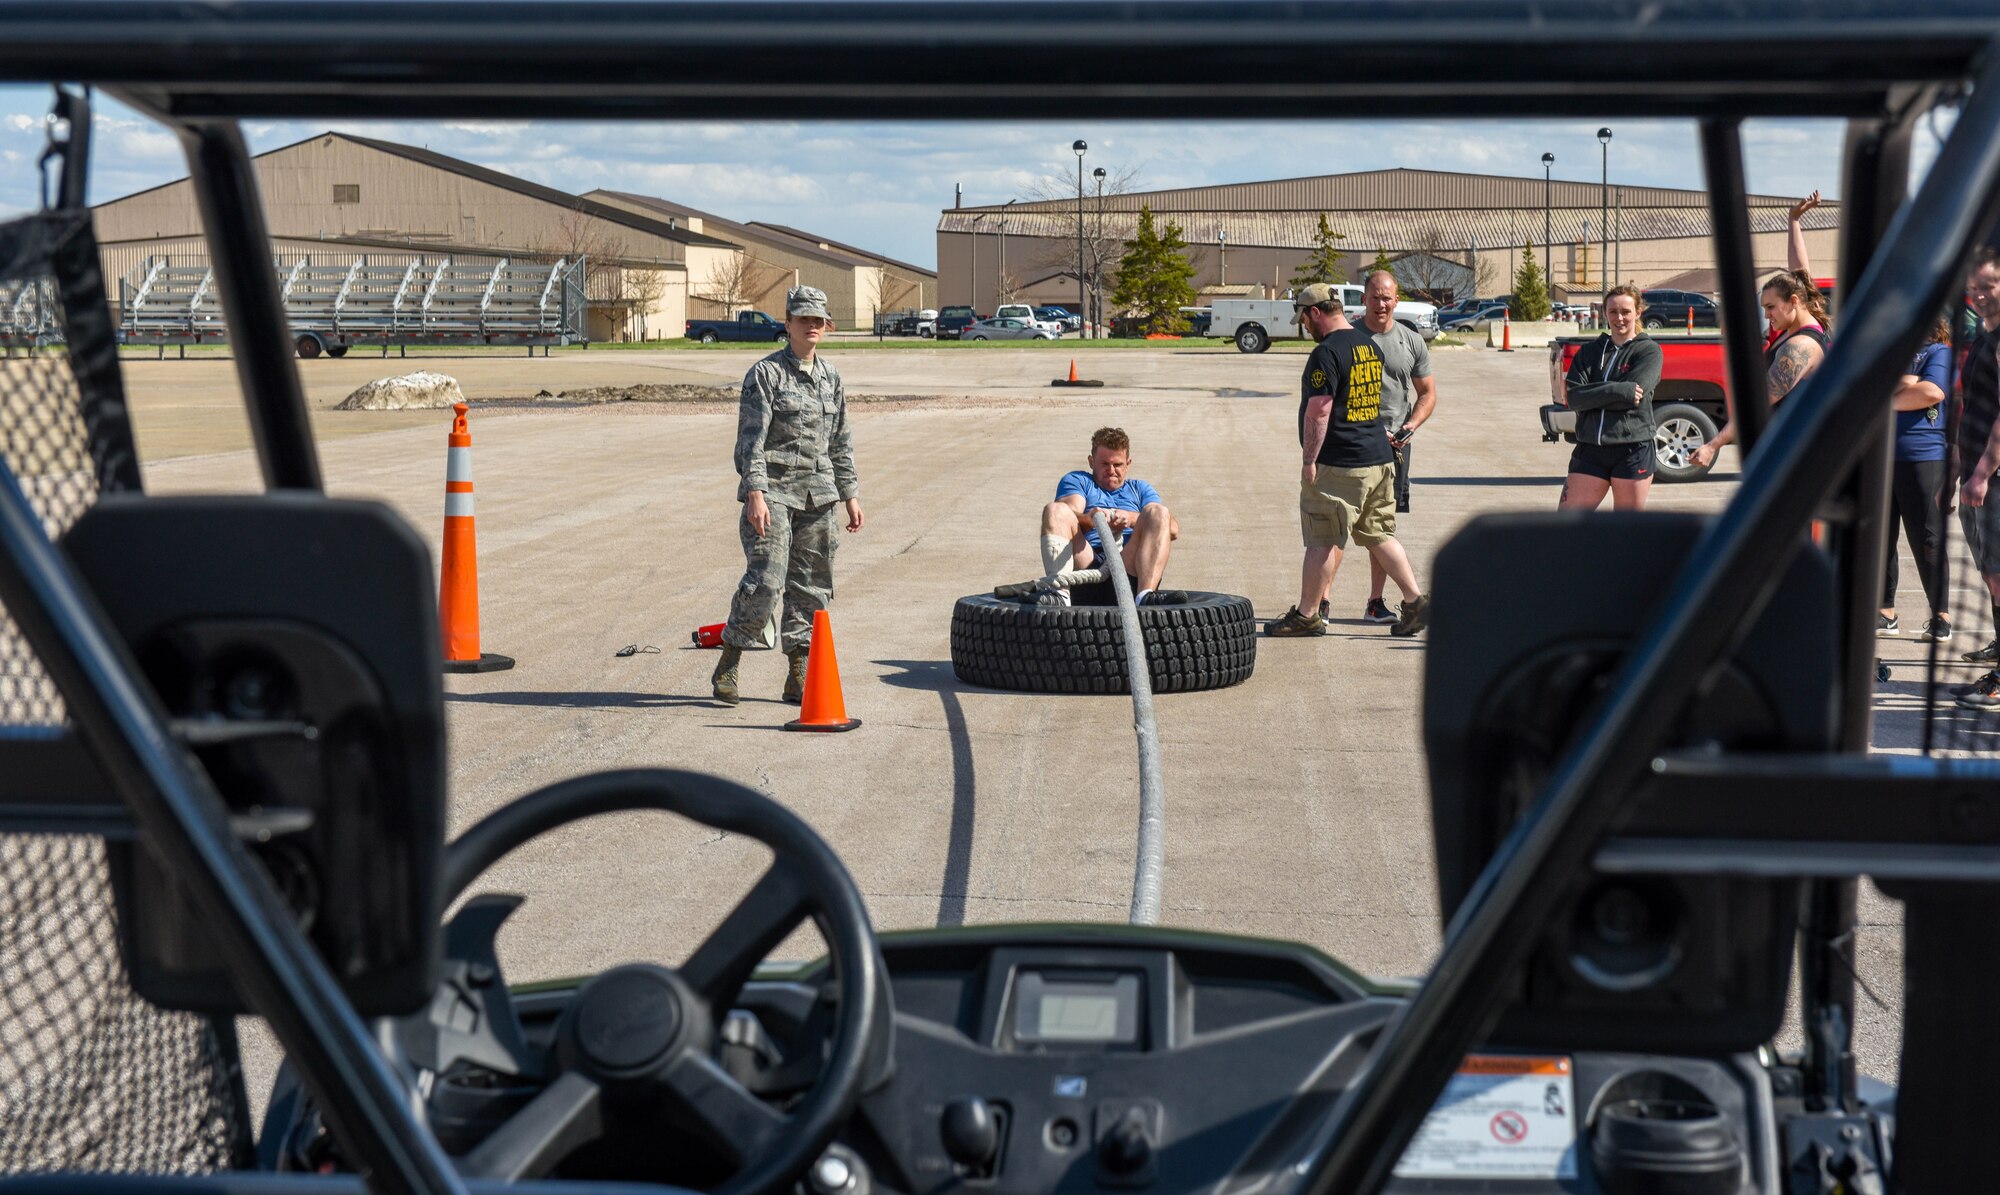 Capt. Max, assigned to the 89th Attack Squadron, is timed as he pulls an unmanned vehicle toward him for the Ellsworth Air Force Base’s Strongest Competition on Ellsworth AFB, S.D., April 25, 2019. After all the competitors took their turns towing the vehicle across the line, they stepped up their game and also took turns pulling in a bus. During the free event, which was hosted by the 28th Force Support Squadron, participants performed feats of strength via five exercises: max-out deadlift, farmer’s carry, keg run, tire flip and vehicle pull.  (U.S. Air Force photo by Tech. Sgt. Jette Carr)